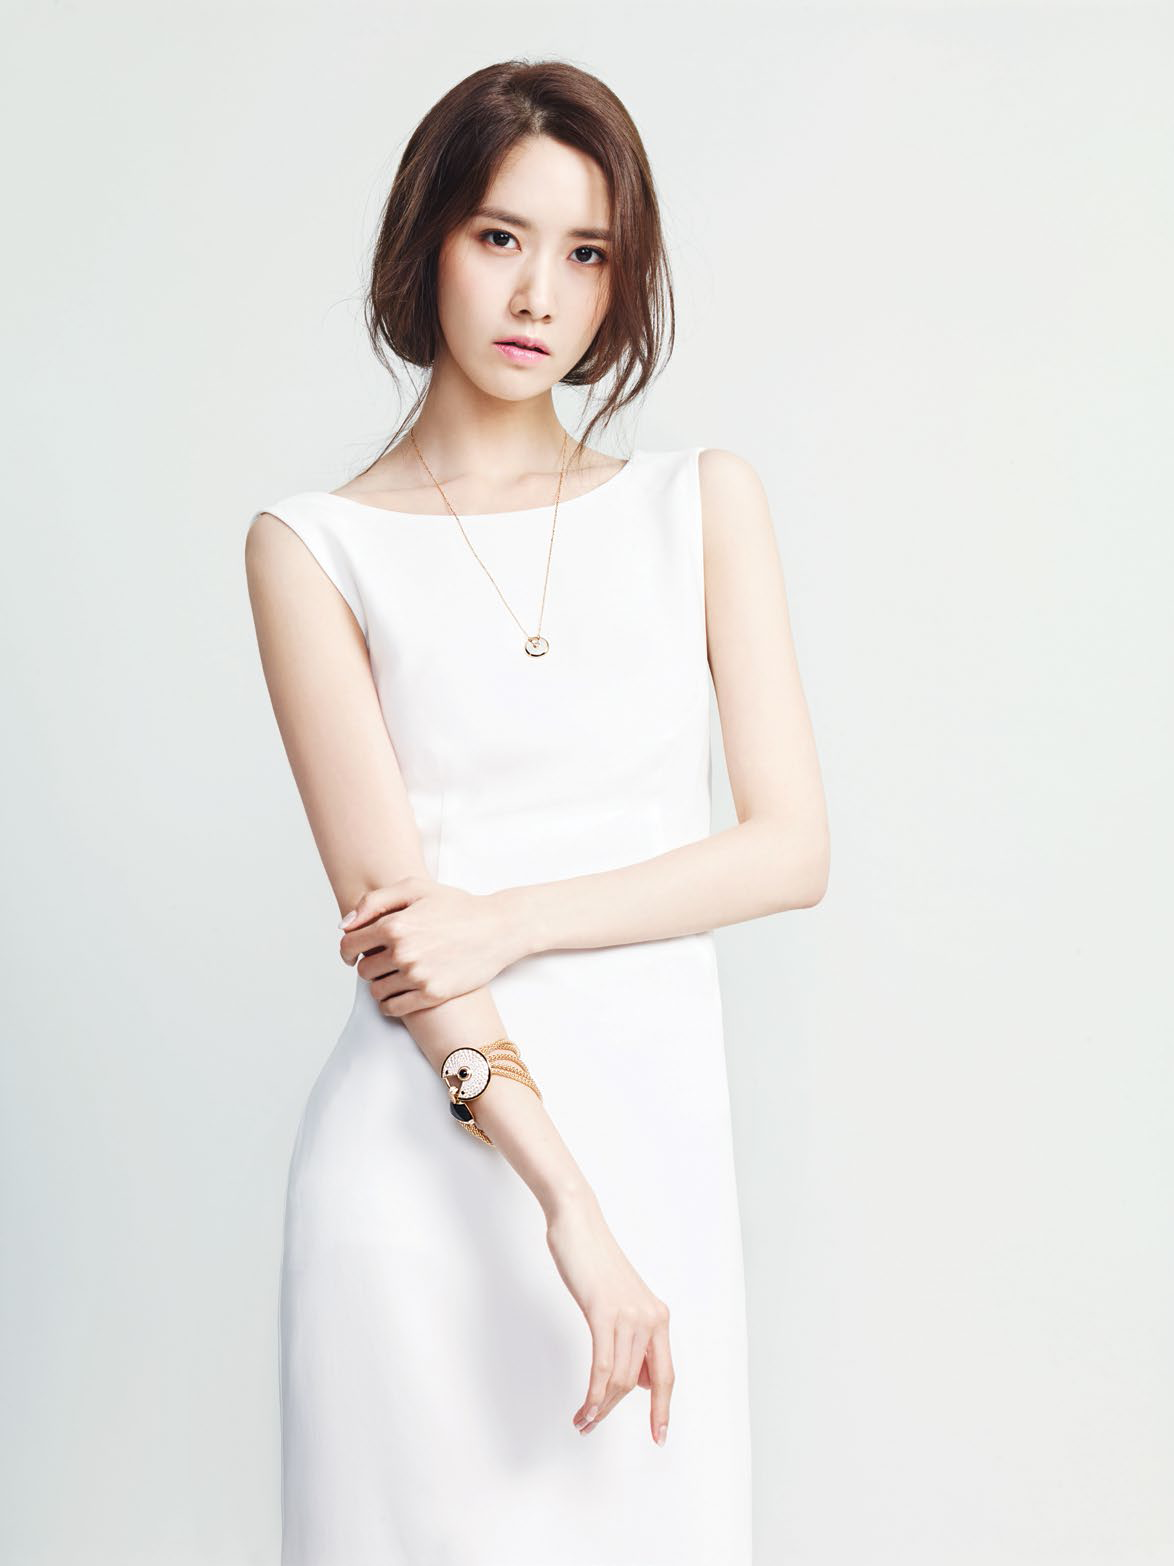 [280314] Yoona Snsd Marie Claire Magazine Issue April